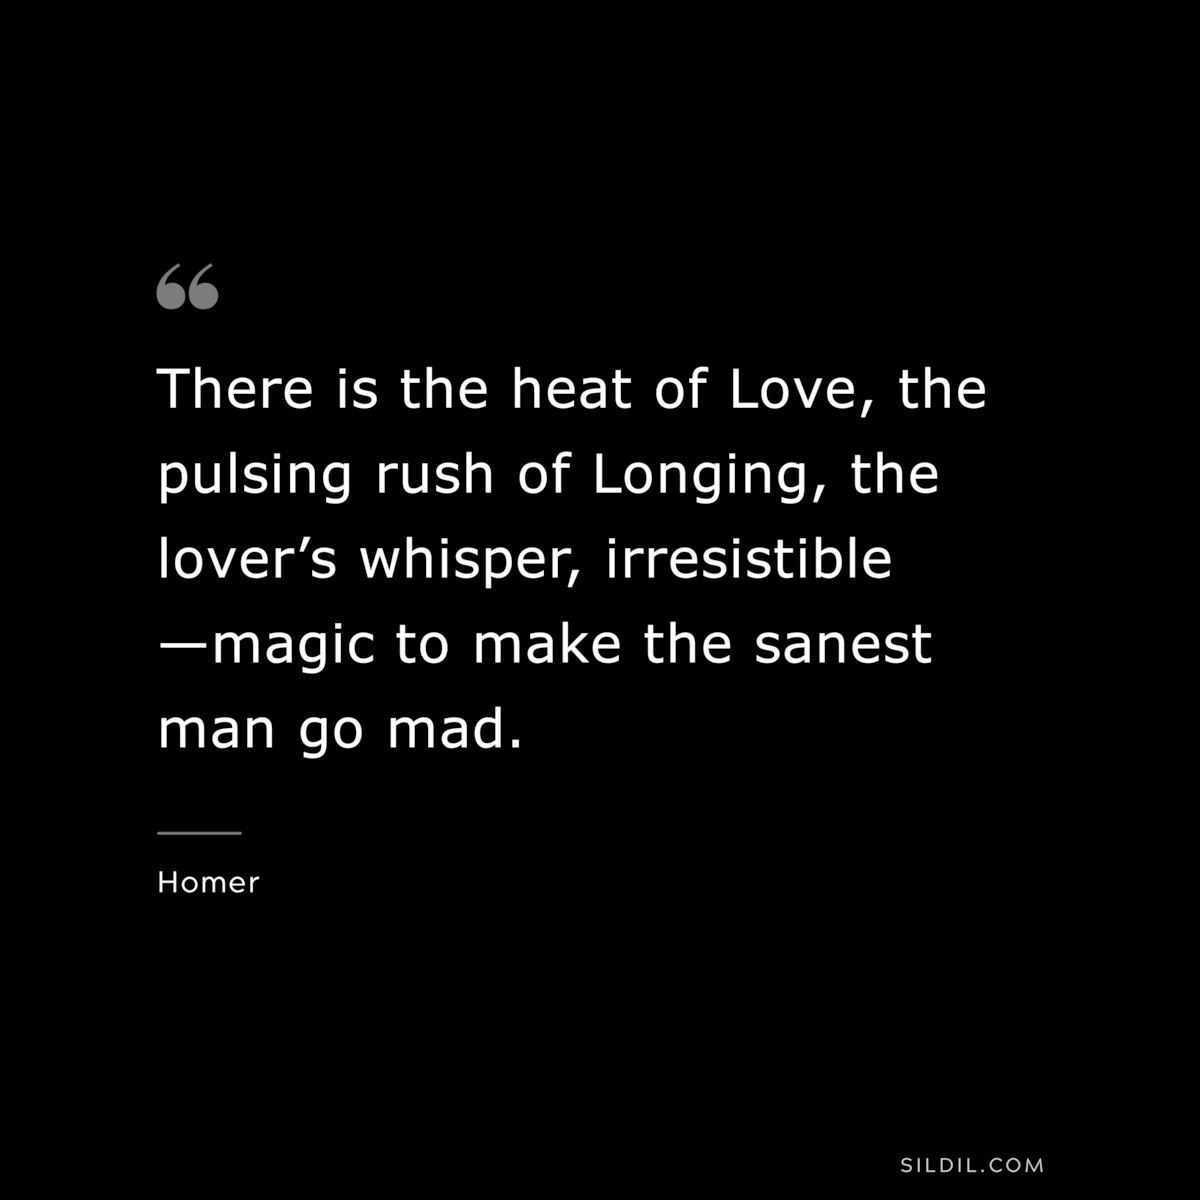 There is the heat of Love, the pulsing rush of Longing, the lover’s whisper, irresistible—magic to make the sanest man go mad. ― Homer